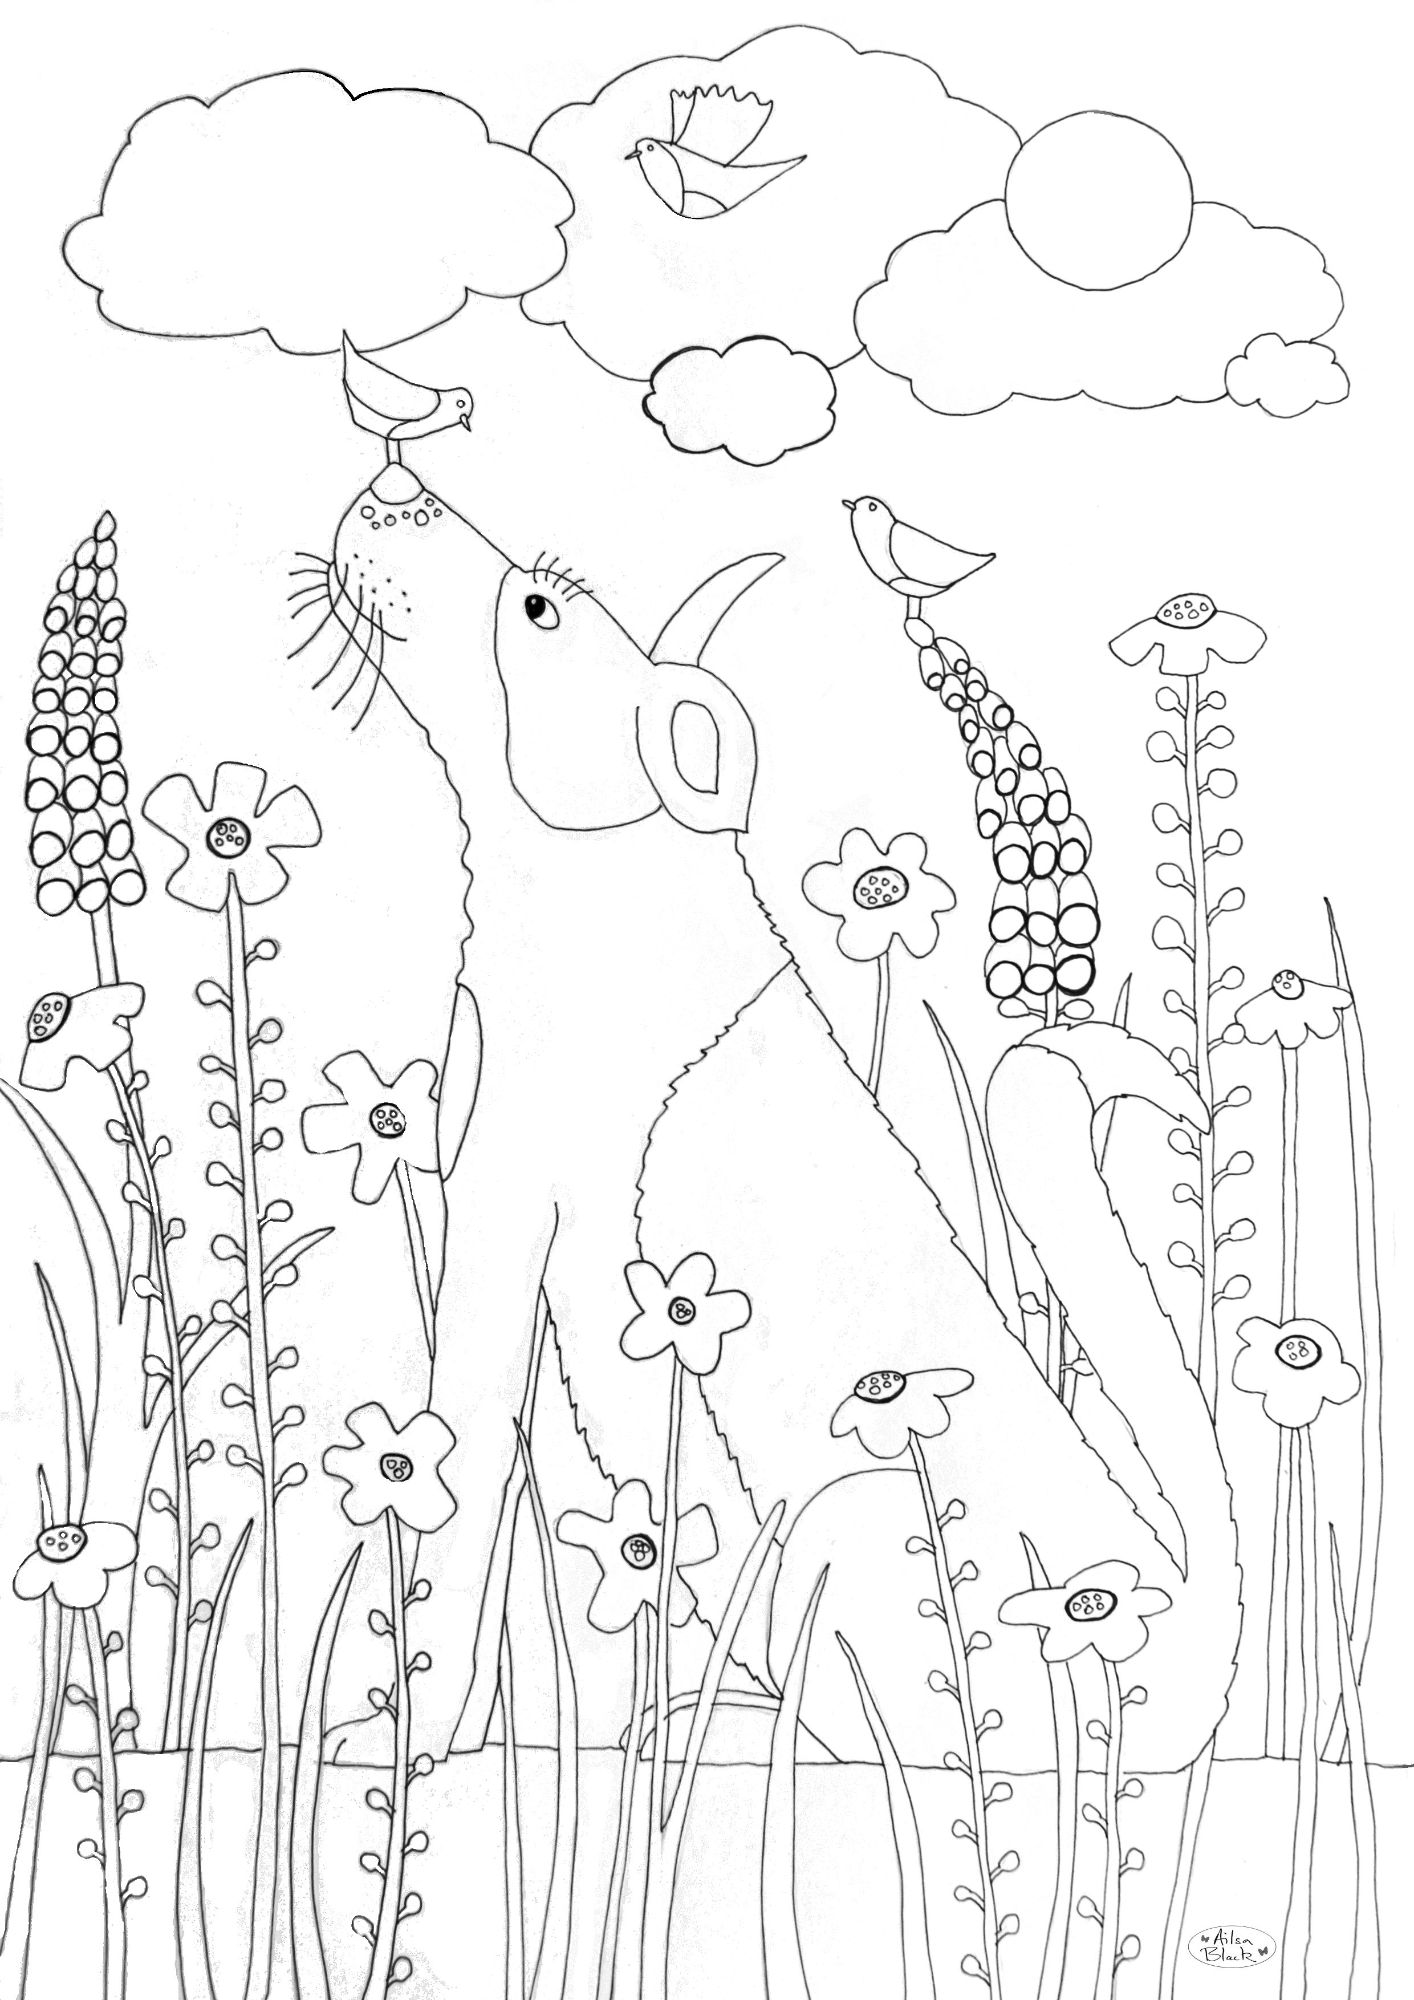 Free collie dog  for colouring in